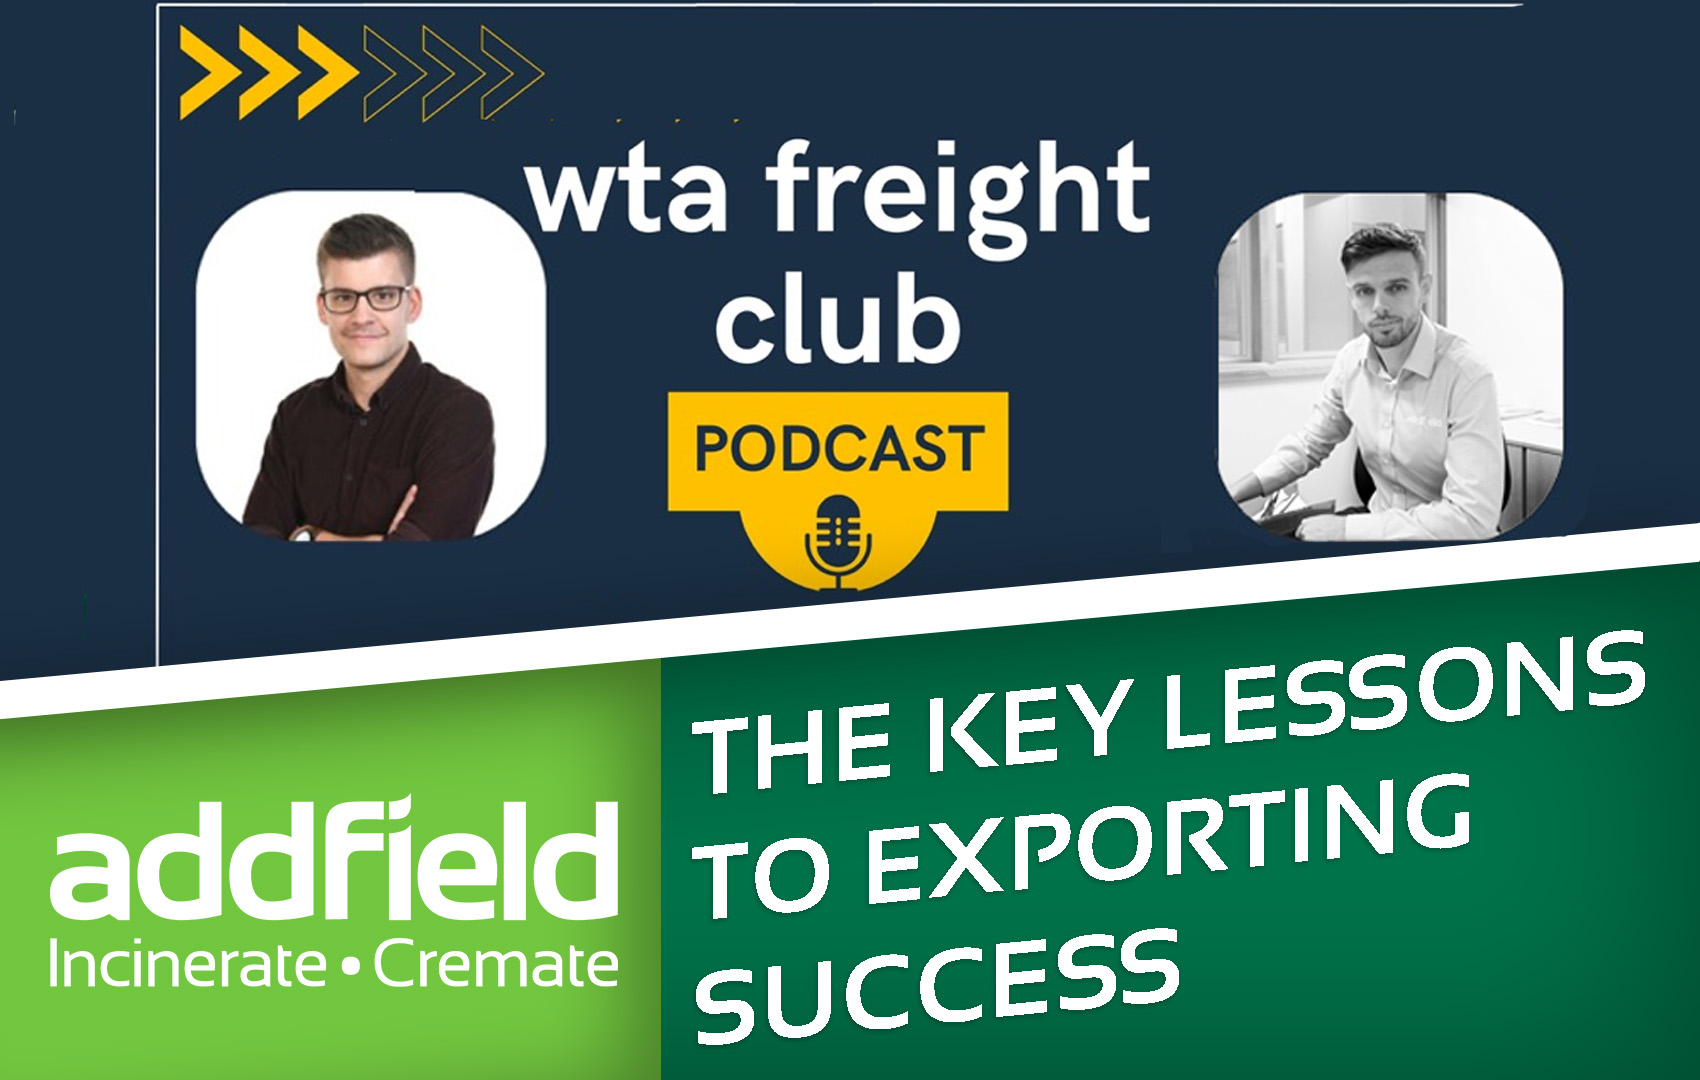 Key Secrets to Export Success with WTA Freight Club